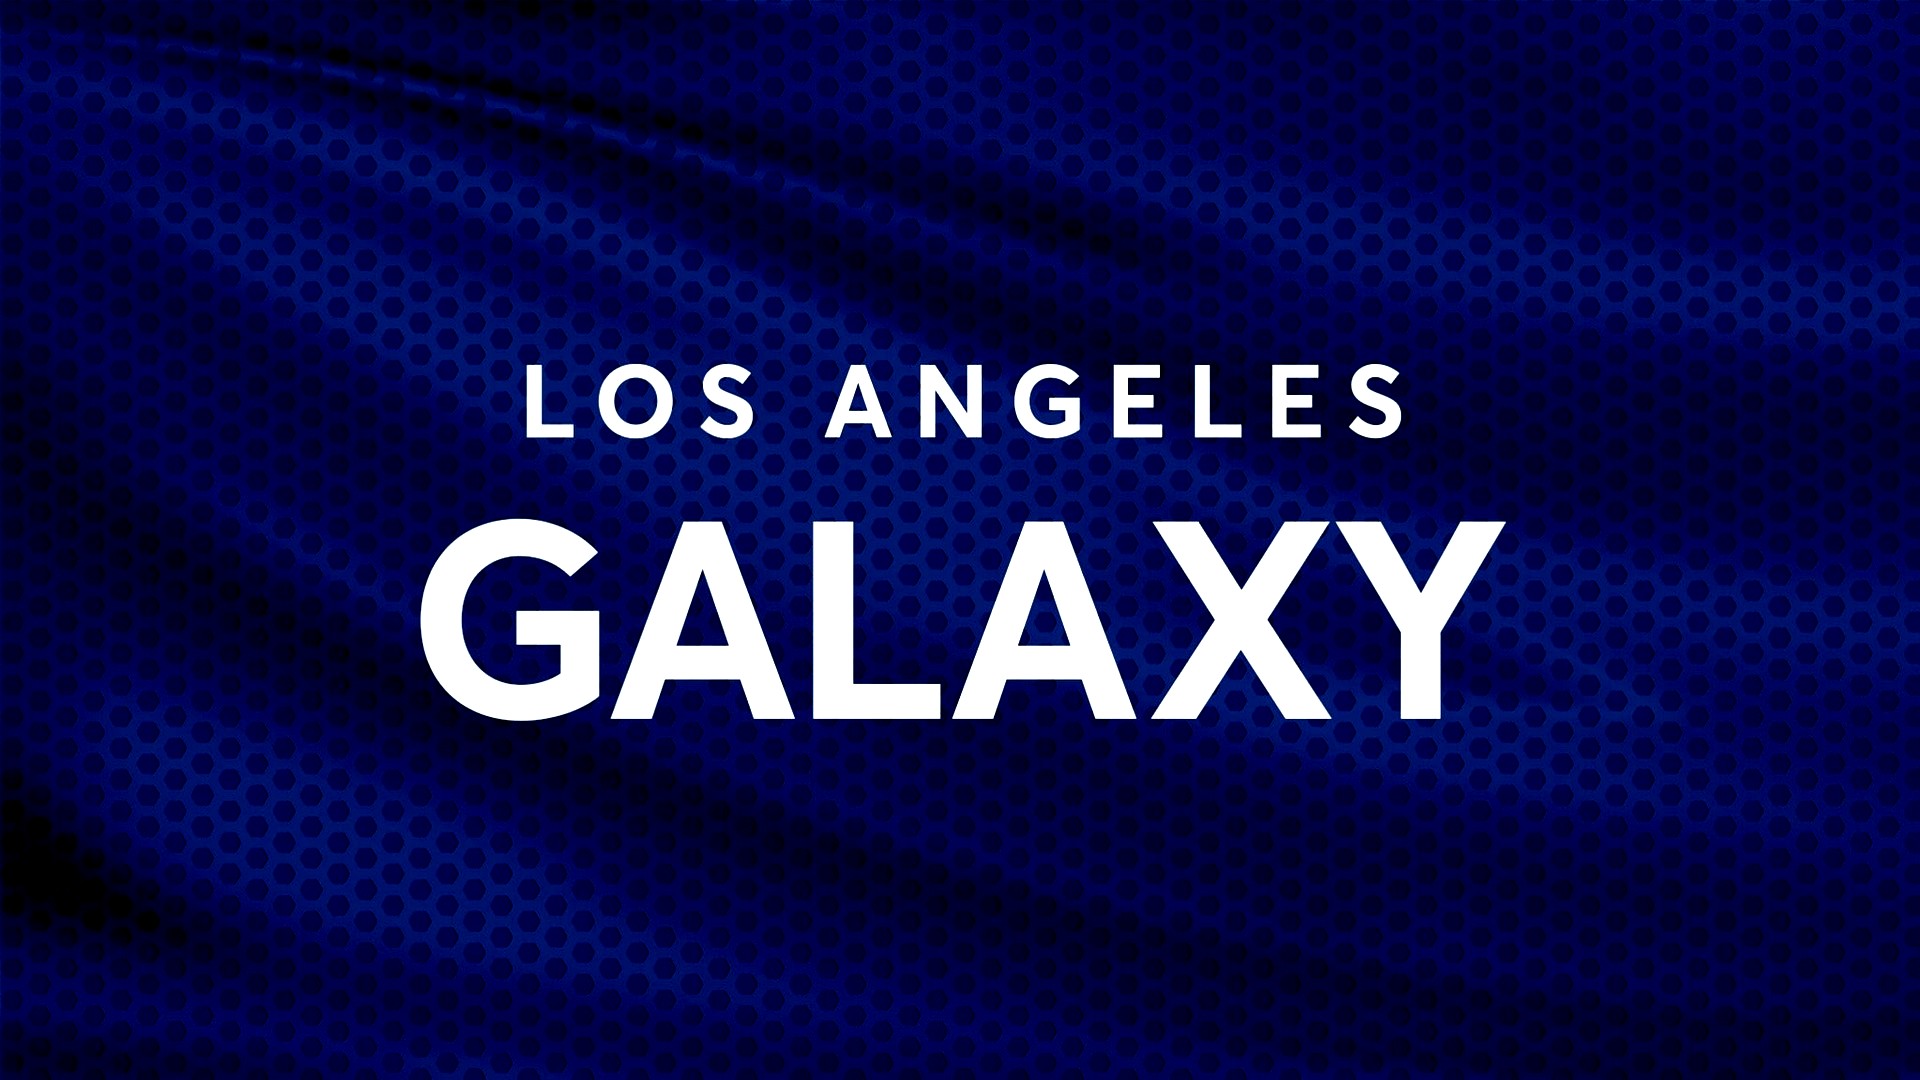 LA Galaxy Wallpaper with high-resolution 1920x1080 pixel. You can use this wallpaper for your Desktop Computers, Mac Screensavers, Windows Backgrounds, iPhone Wallpapers, Tablet or Android Lock screen and another Mobile device